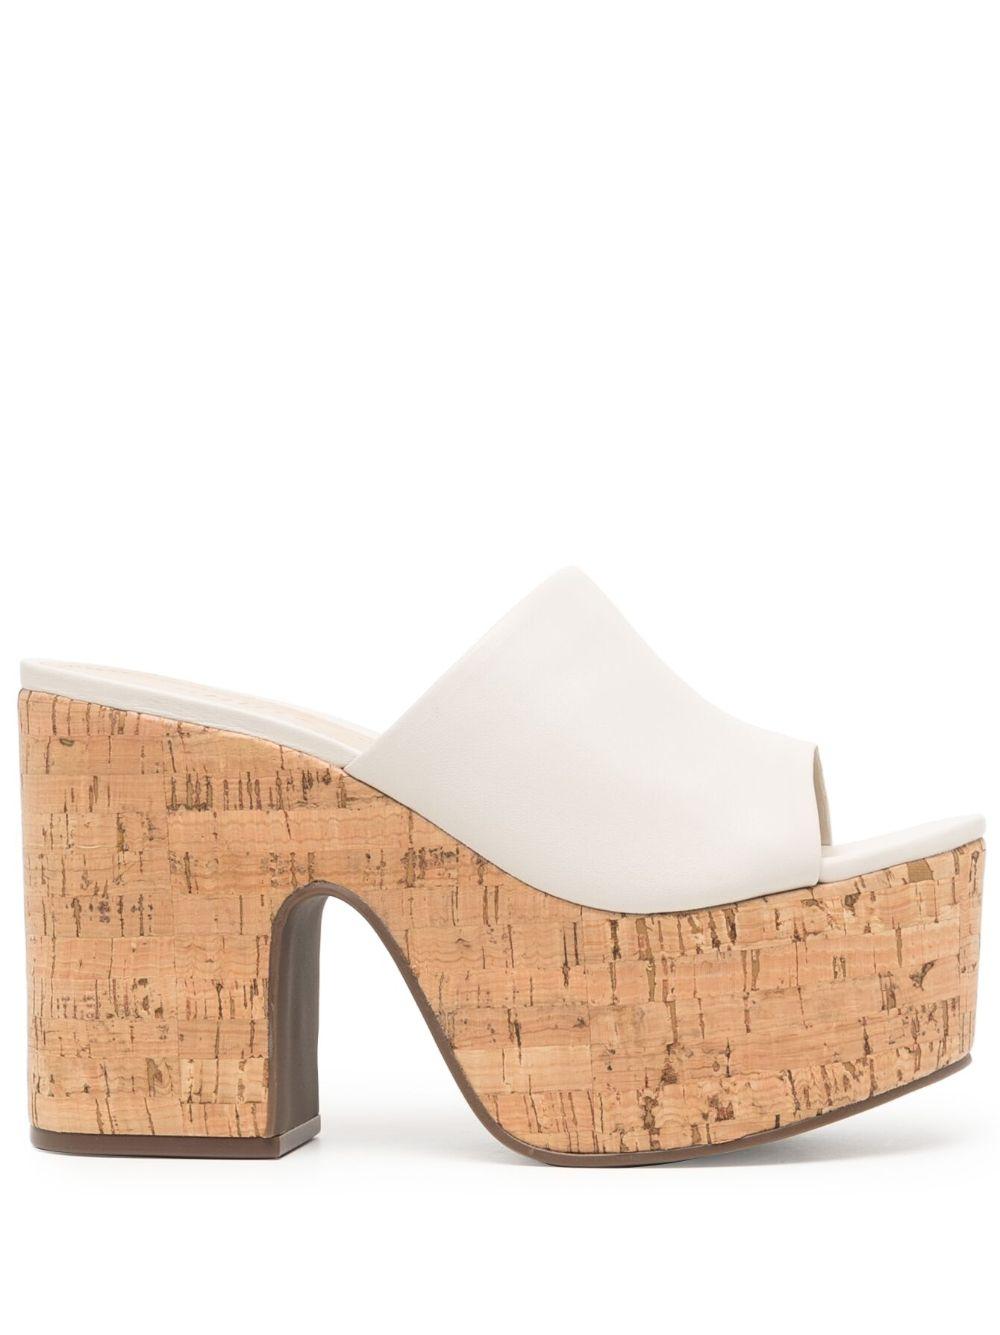 SCHUTZ SHOES 120mm Wedge Sandals in Natural | Lyst